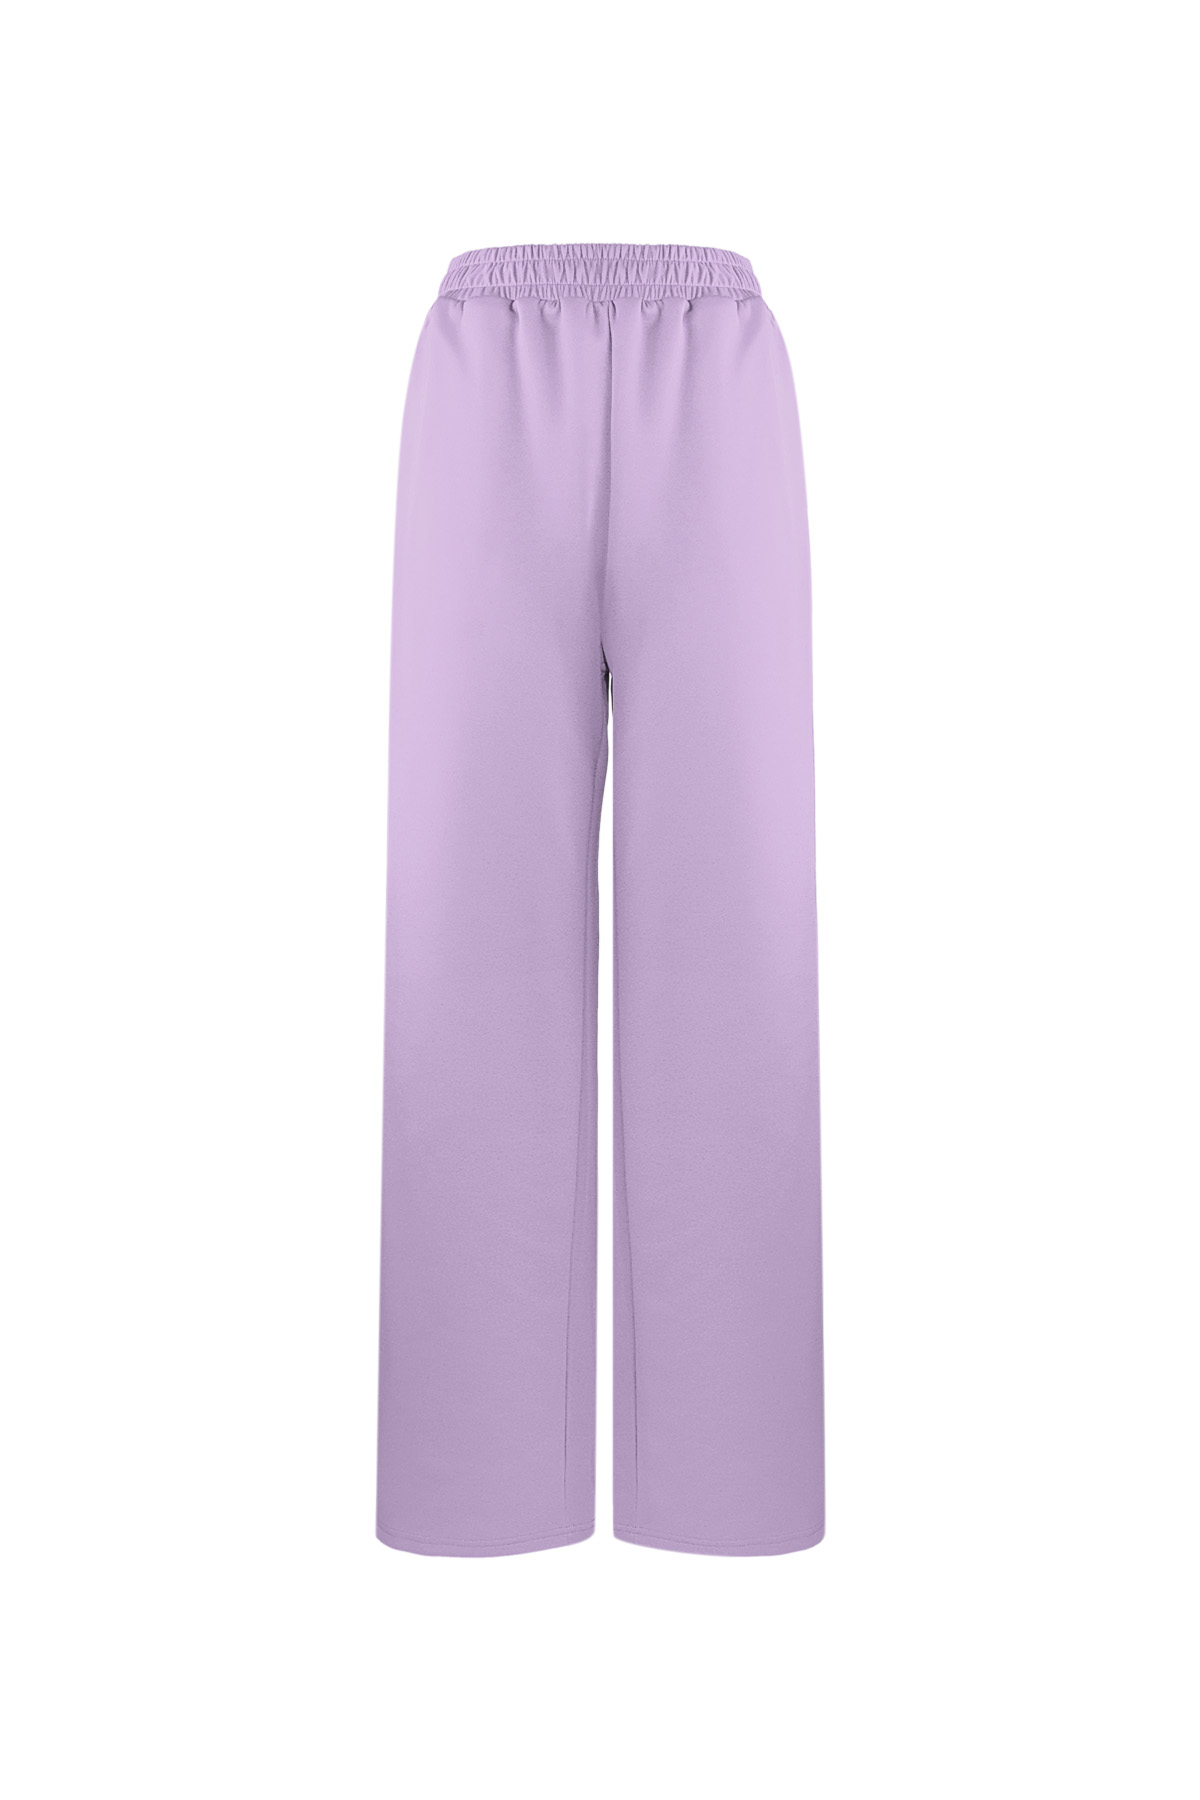 Striped must have pants - purple S h5 